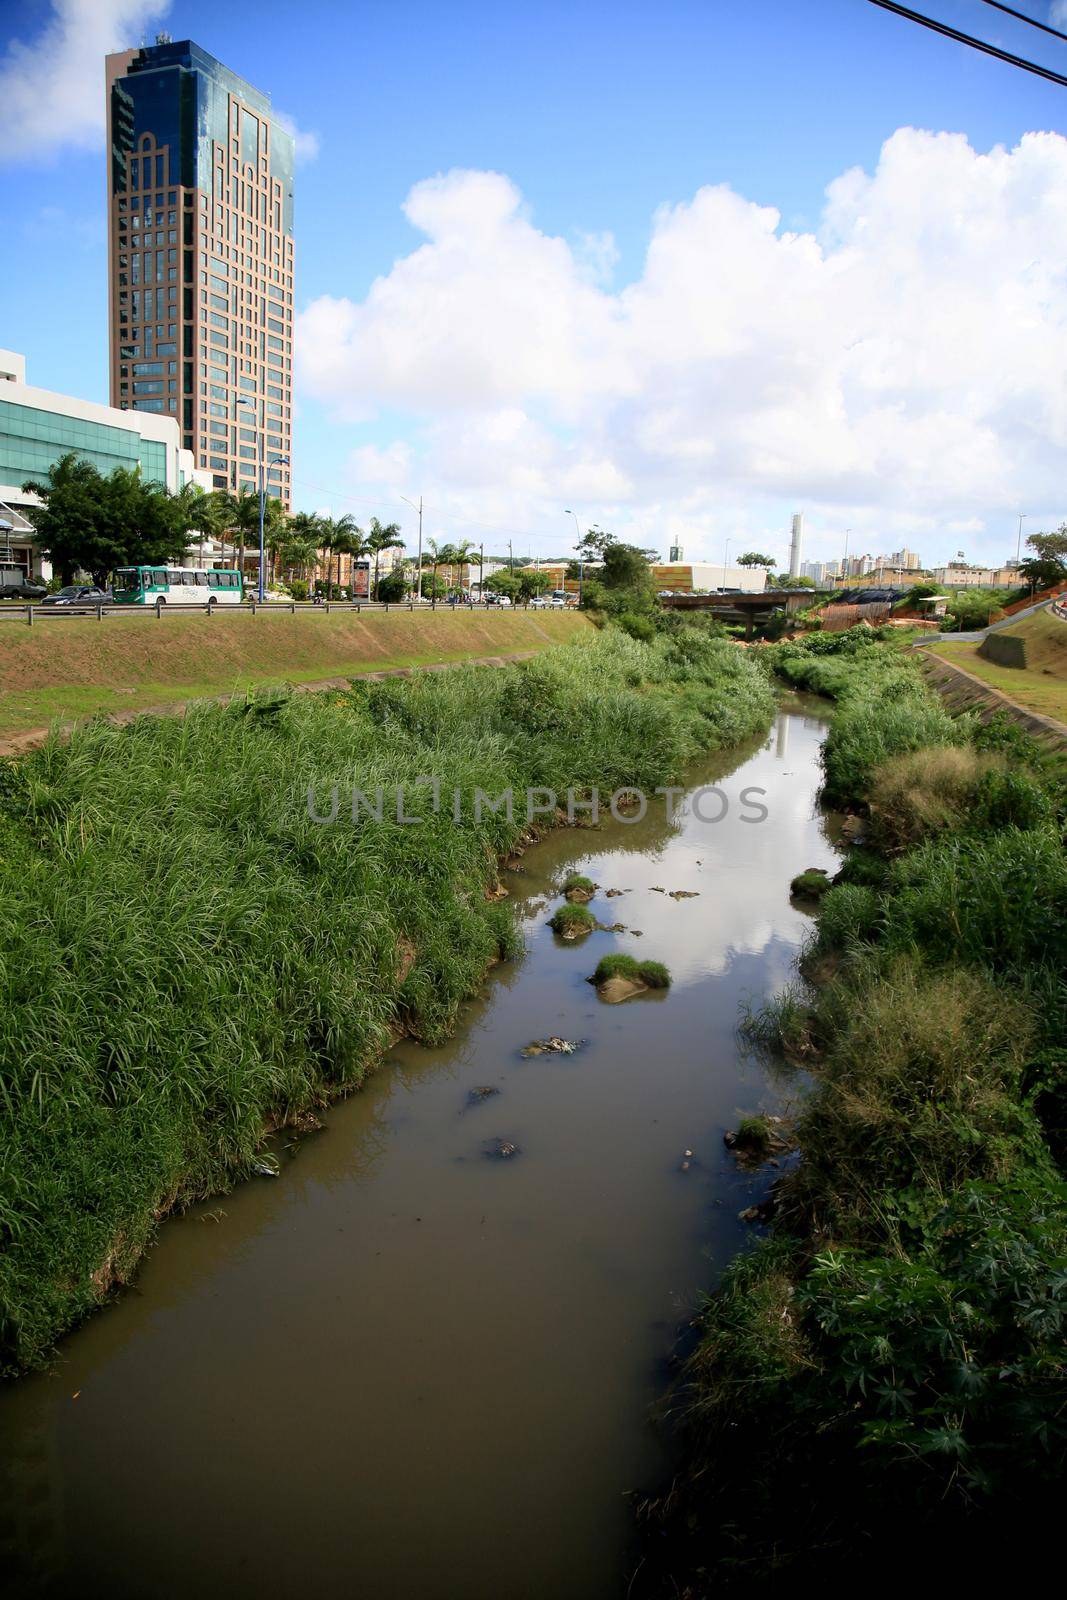 salvador, bahia, brazil - july 20, 2021: view of polluted water channel of sewage network in Rio Camurugipe in the city of Salvador.